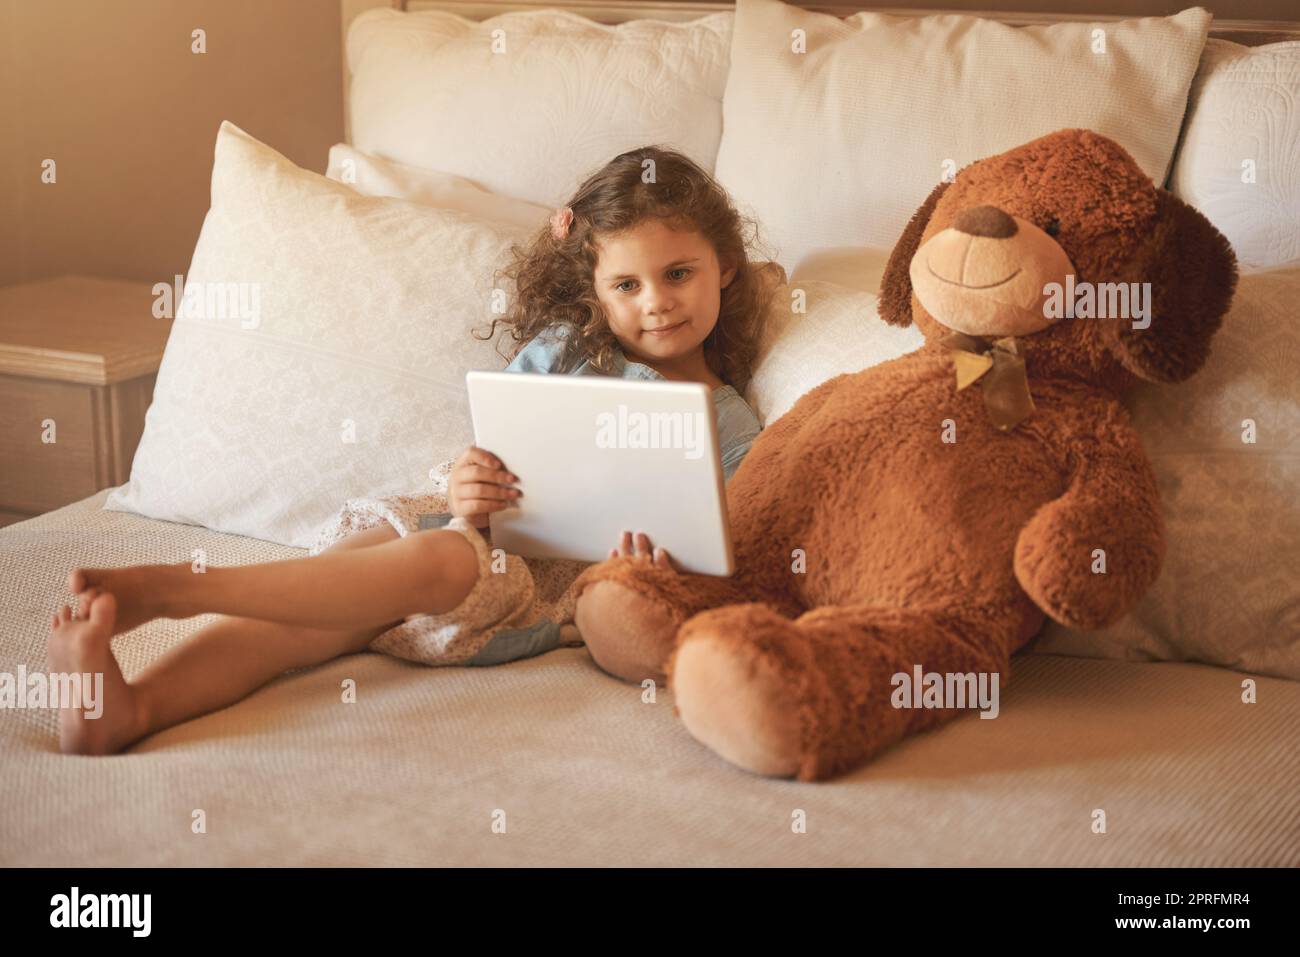 Watching a movie with my best friend. an adorable little girl at home watching a movie on a tablet with her teddybear on the bed. Stock Photo